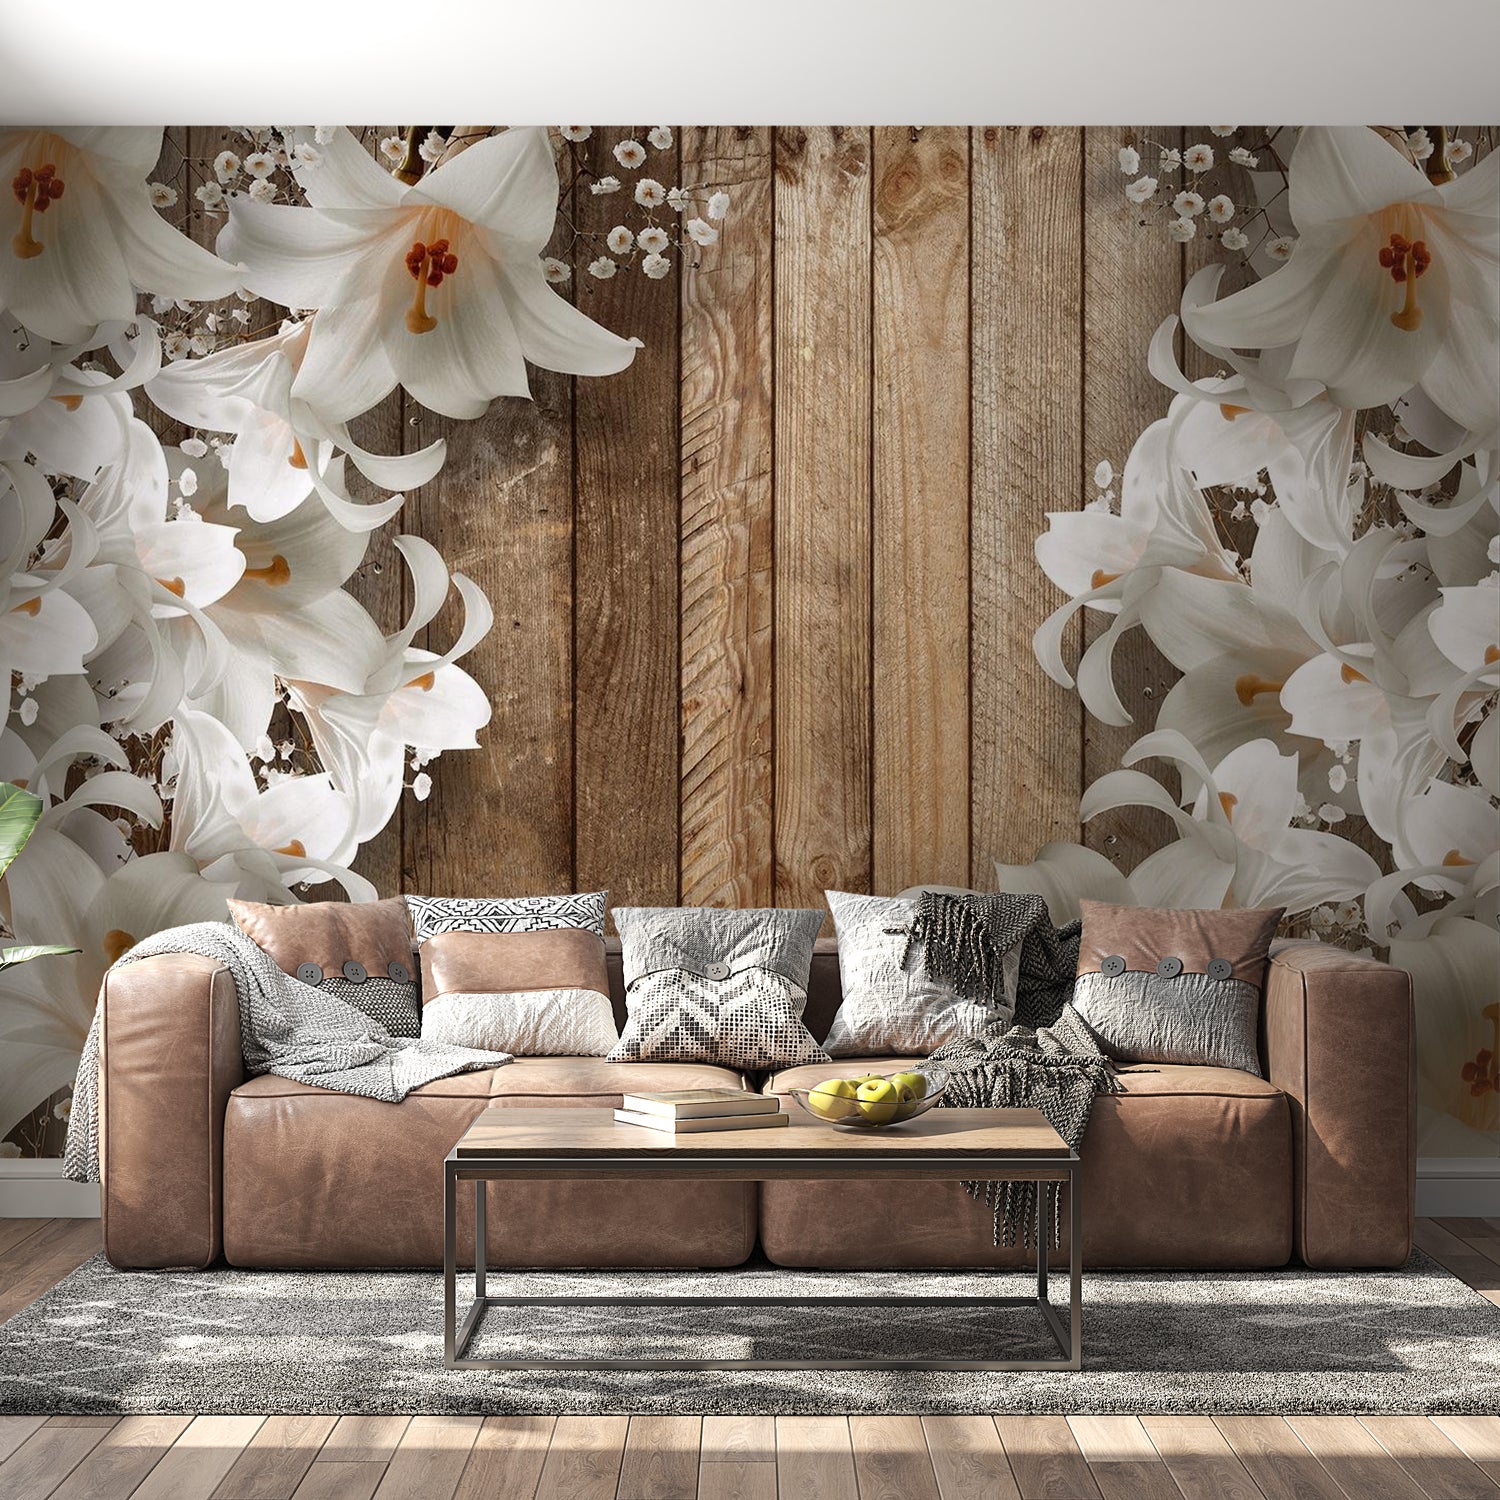 Peel & Stick Floral Wall Mural - Lilies And Wood Boards - Removable Wall Decals